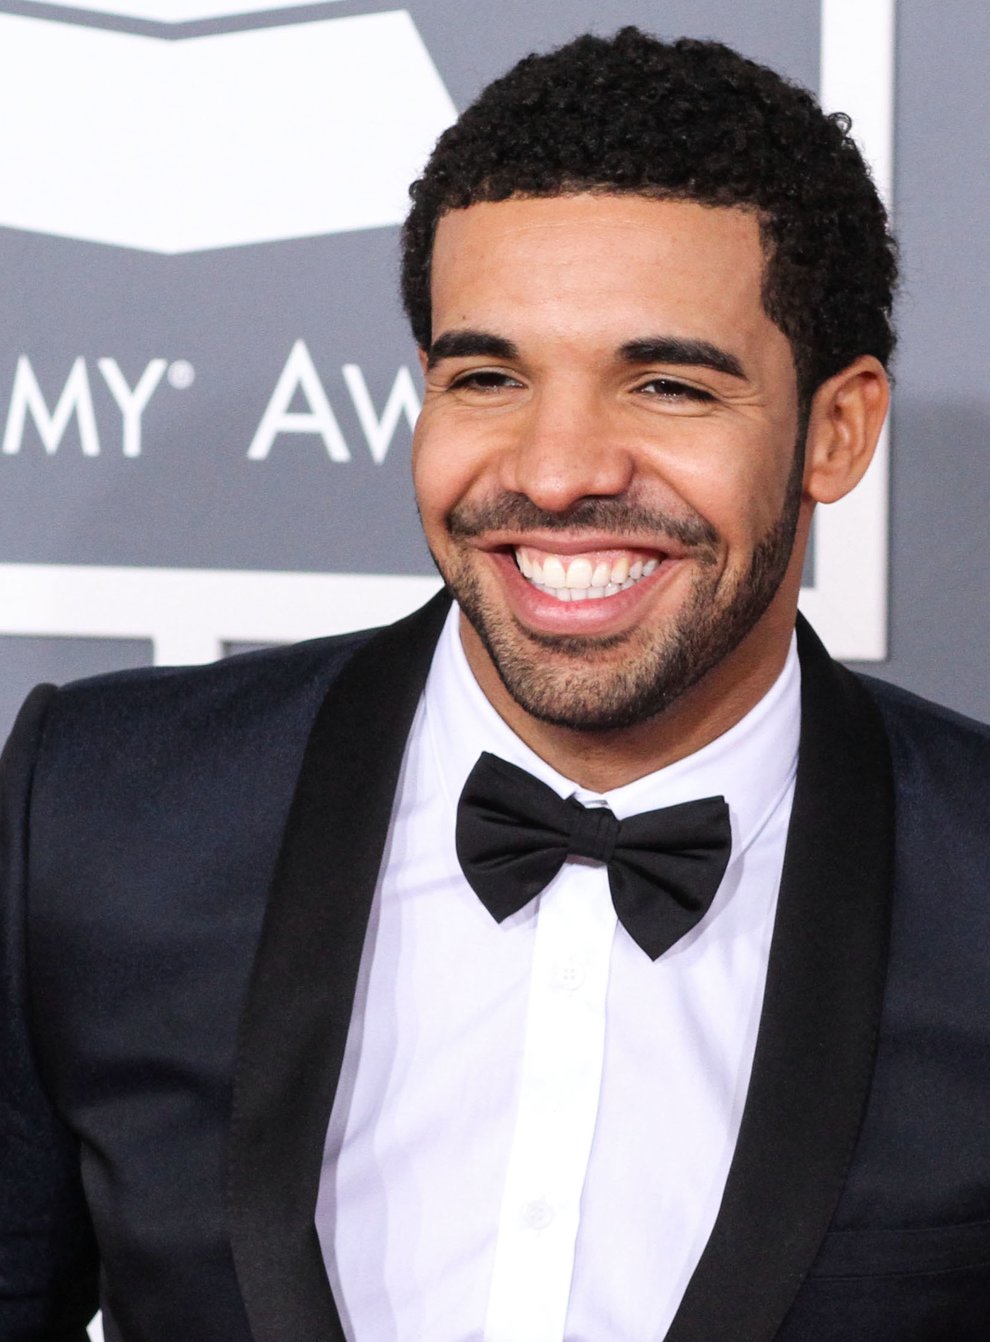 Drake called Jenner a 'side piece' in a song that leaked